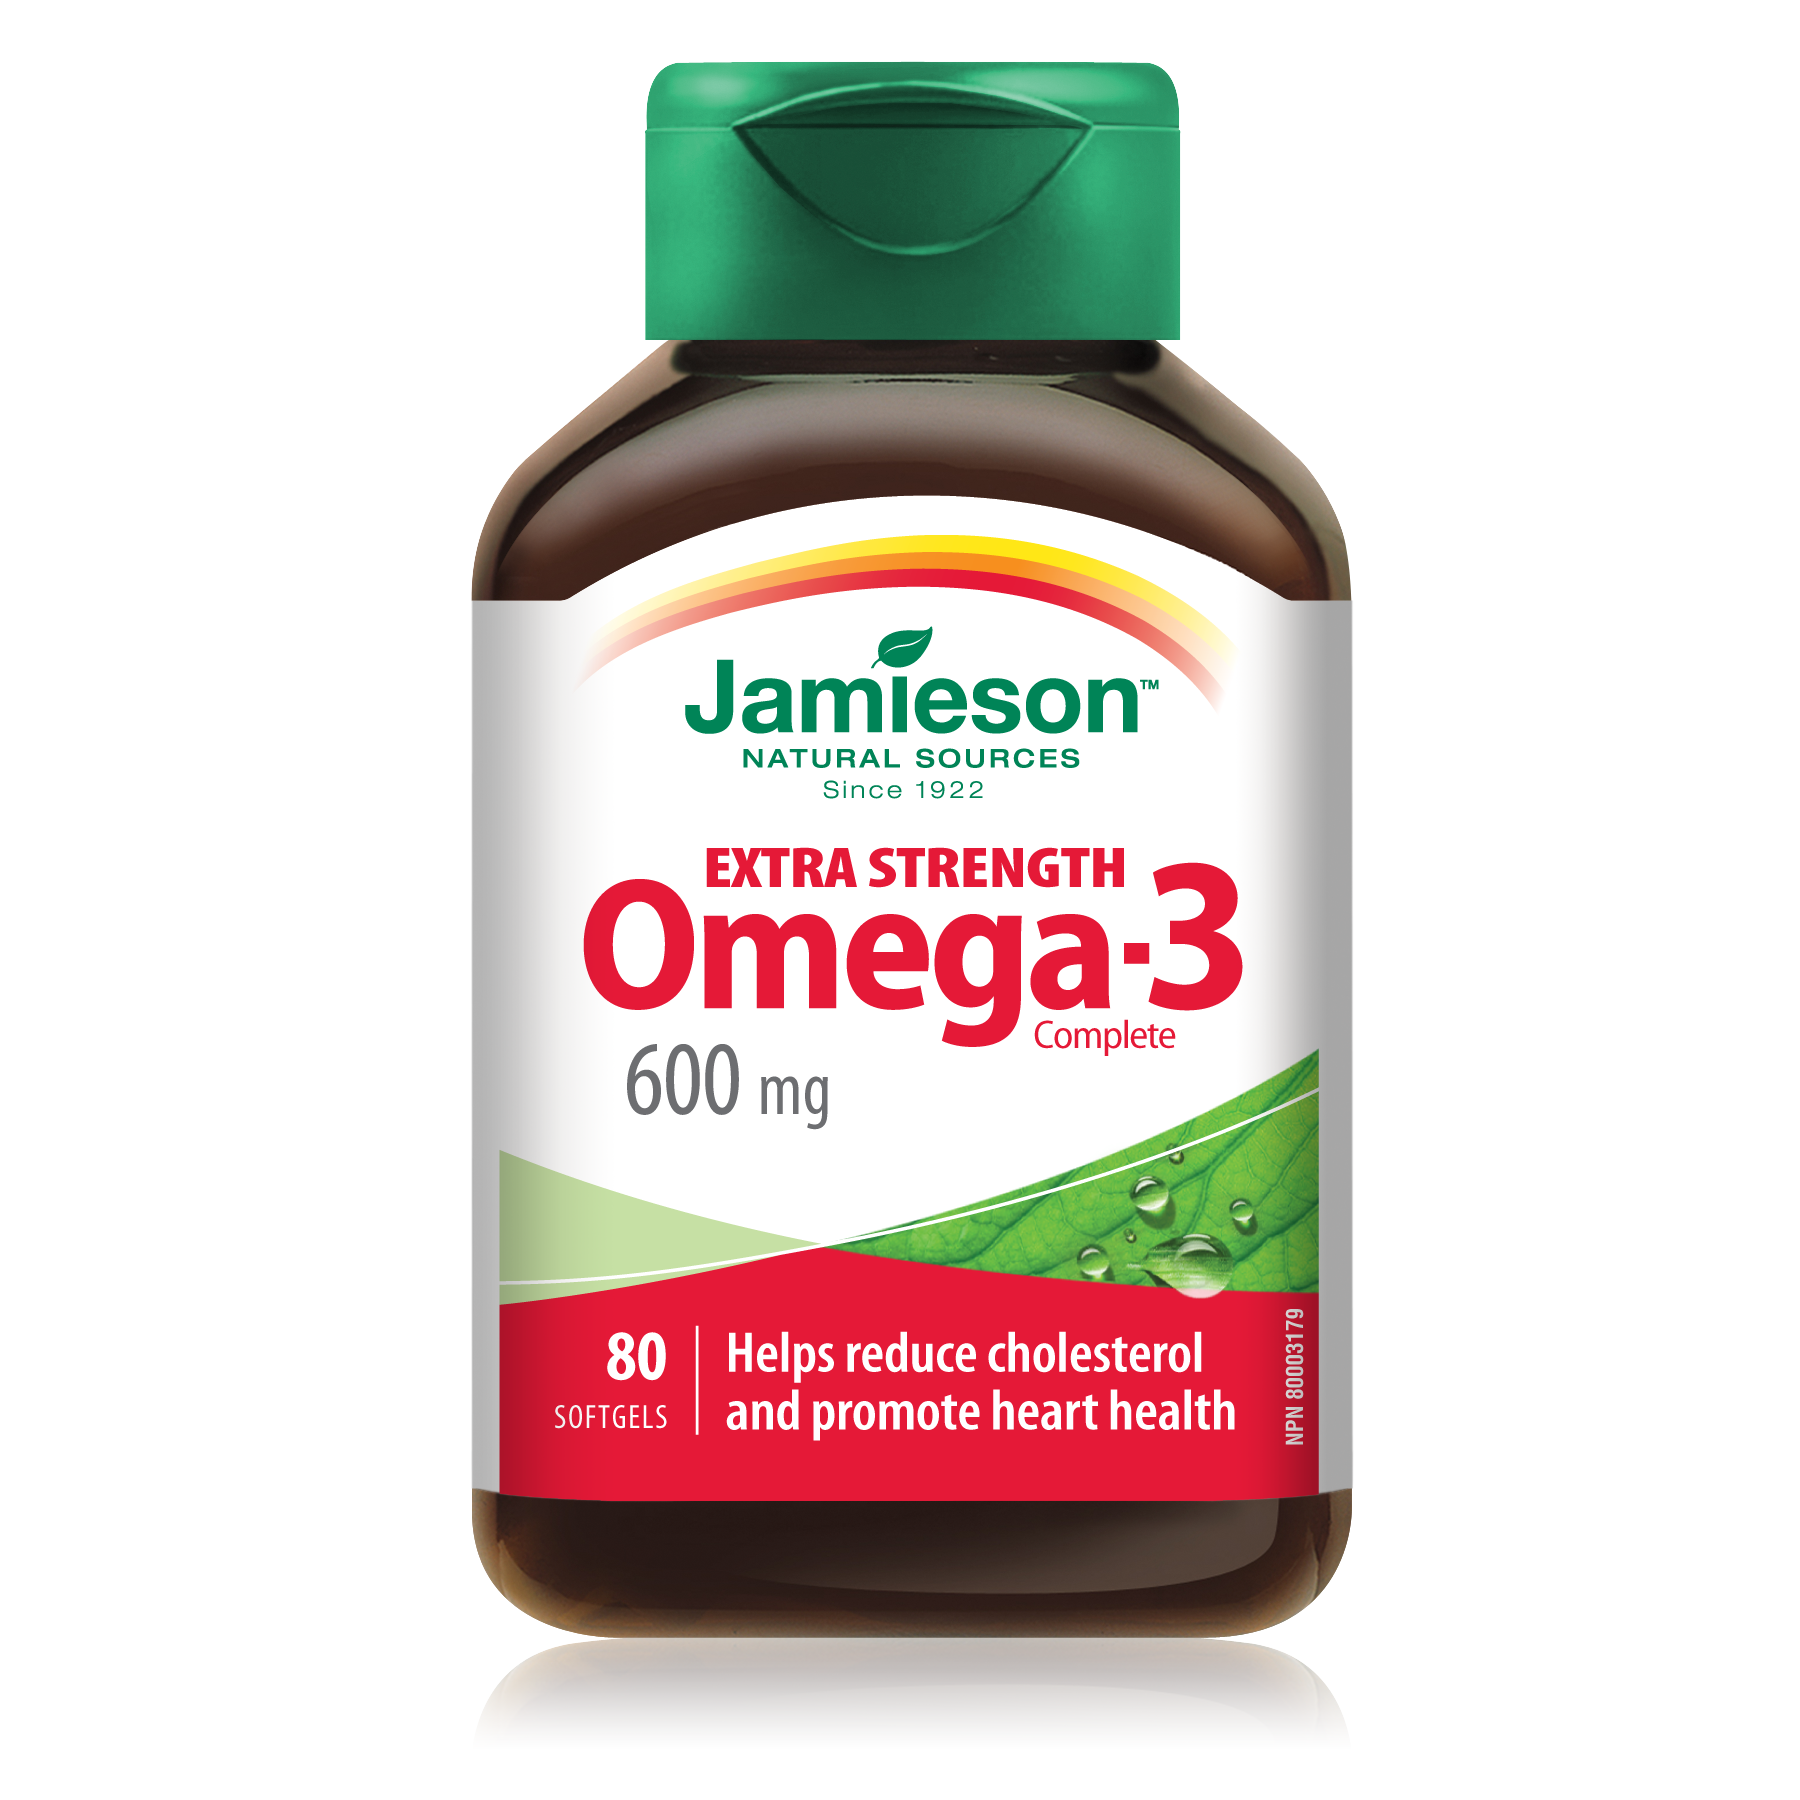 Jamieson Extra Strength Omega-3 Complete 80 Softgels